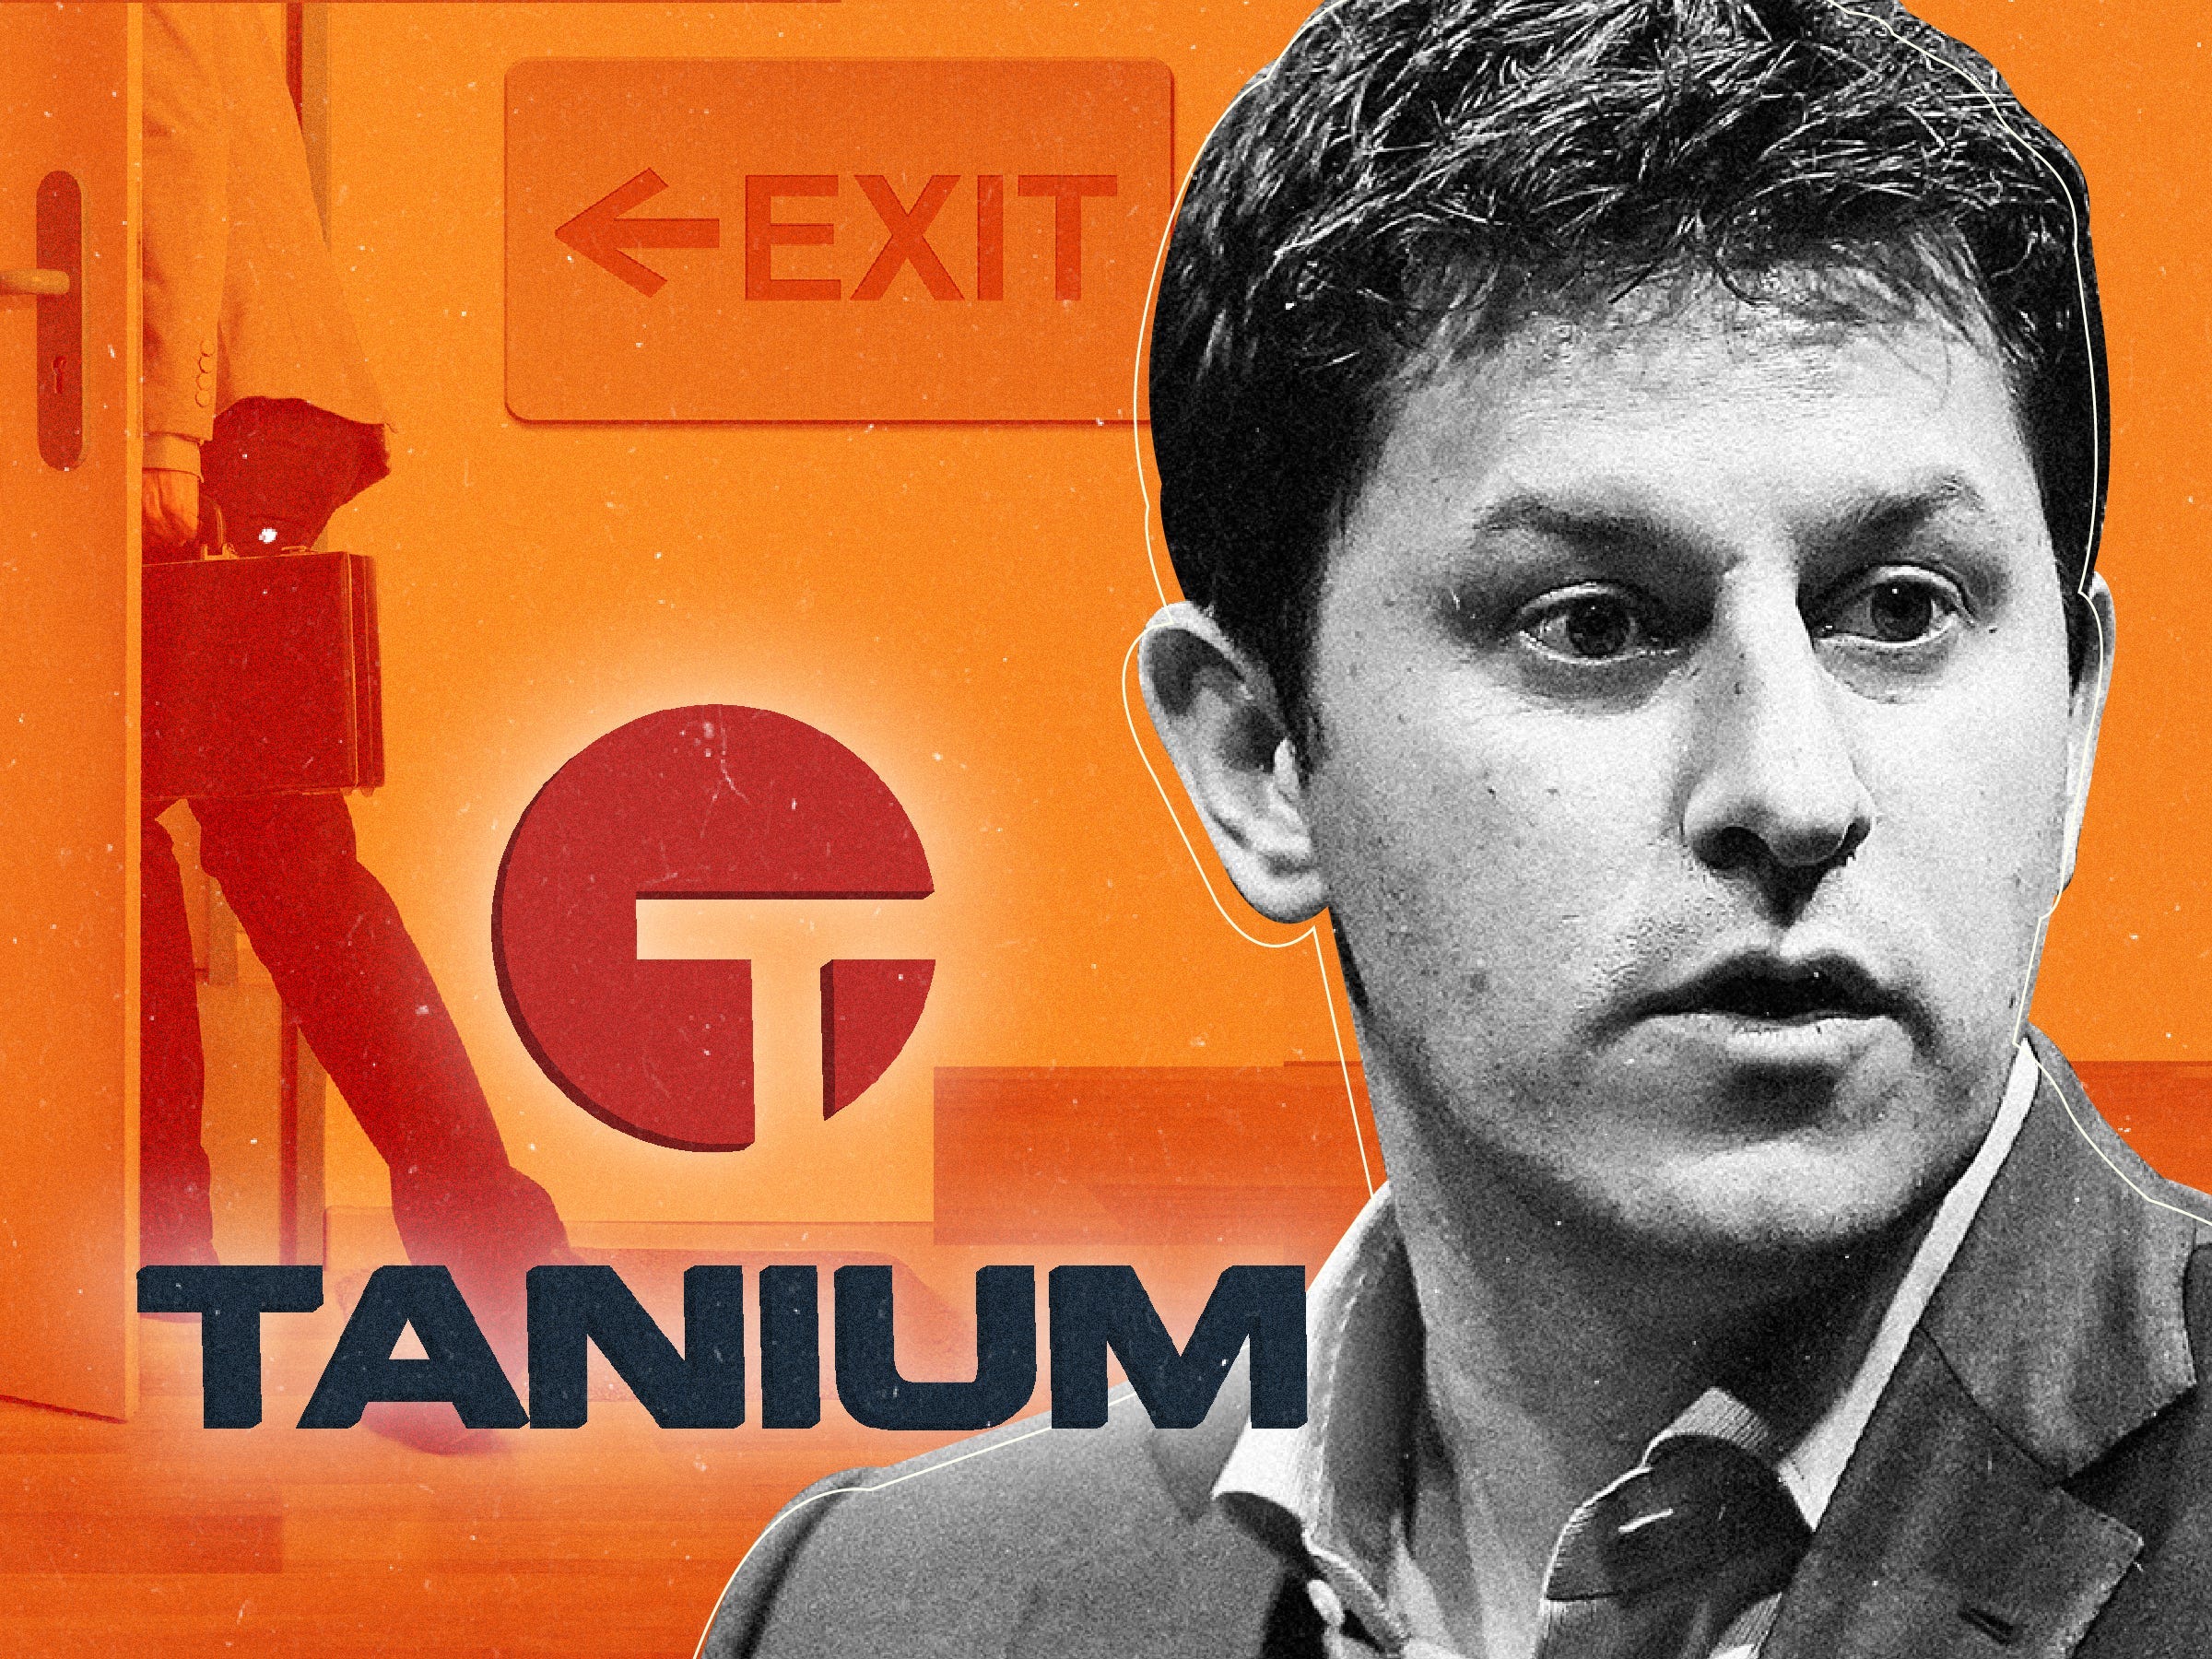 Orion Hindawi, Co-founder, President, and CTO of Tanium with a person walking out the door behind him to the left and the Tanium logo on the right on an orange background.